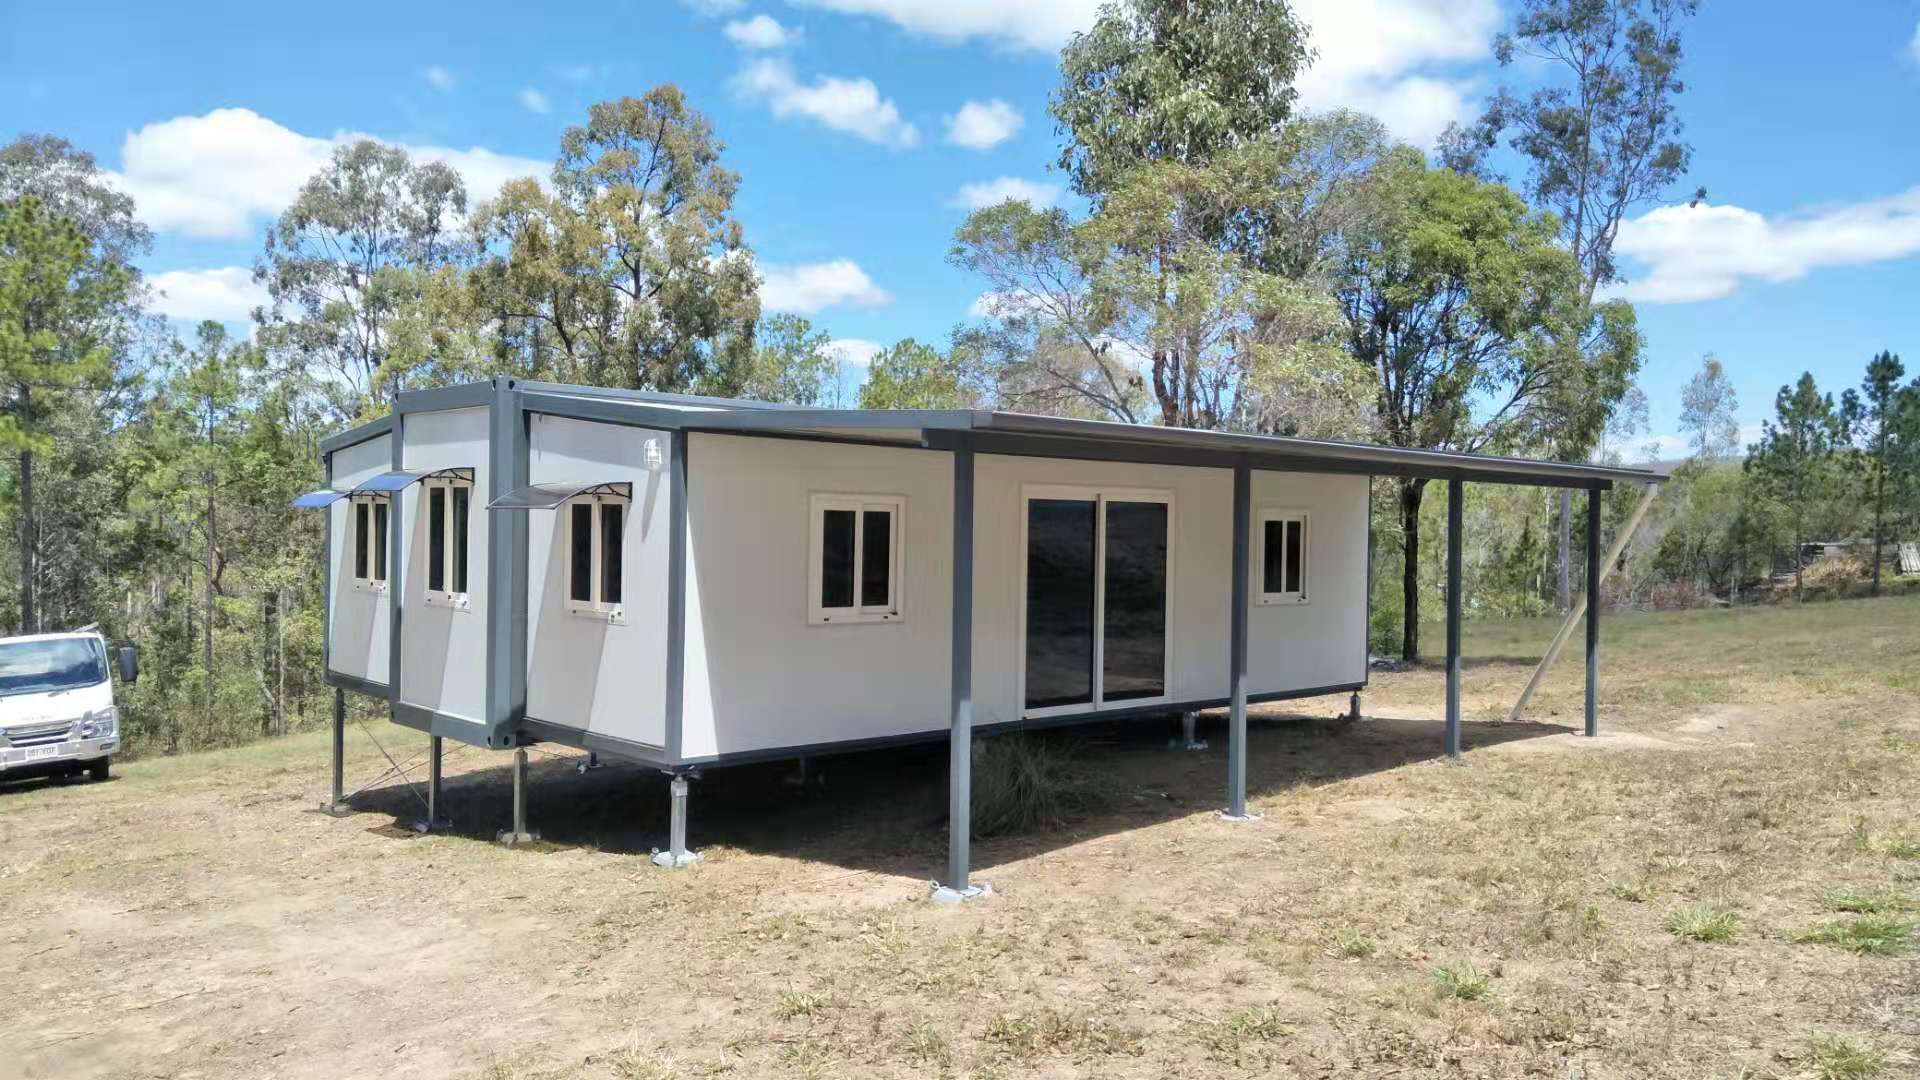 newly installed tiny / small home on vacant rural land